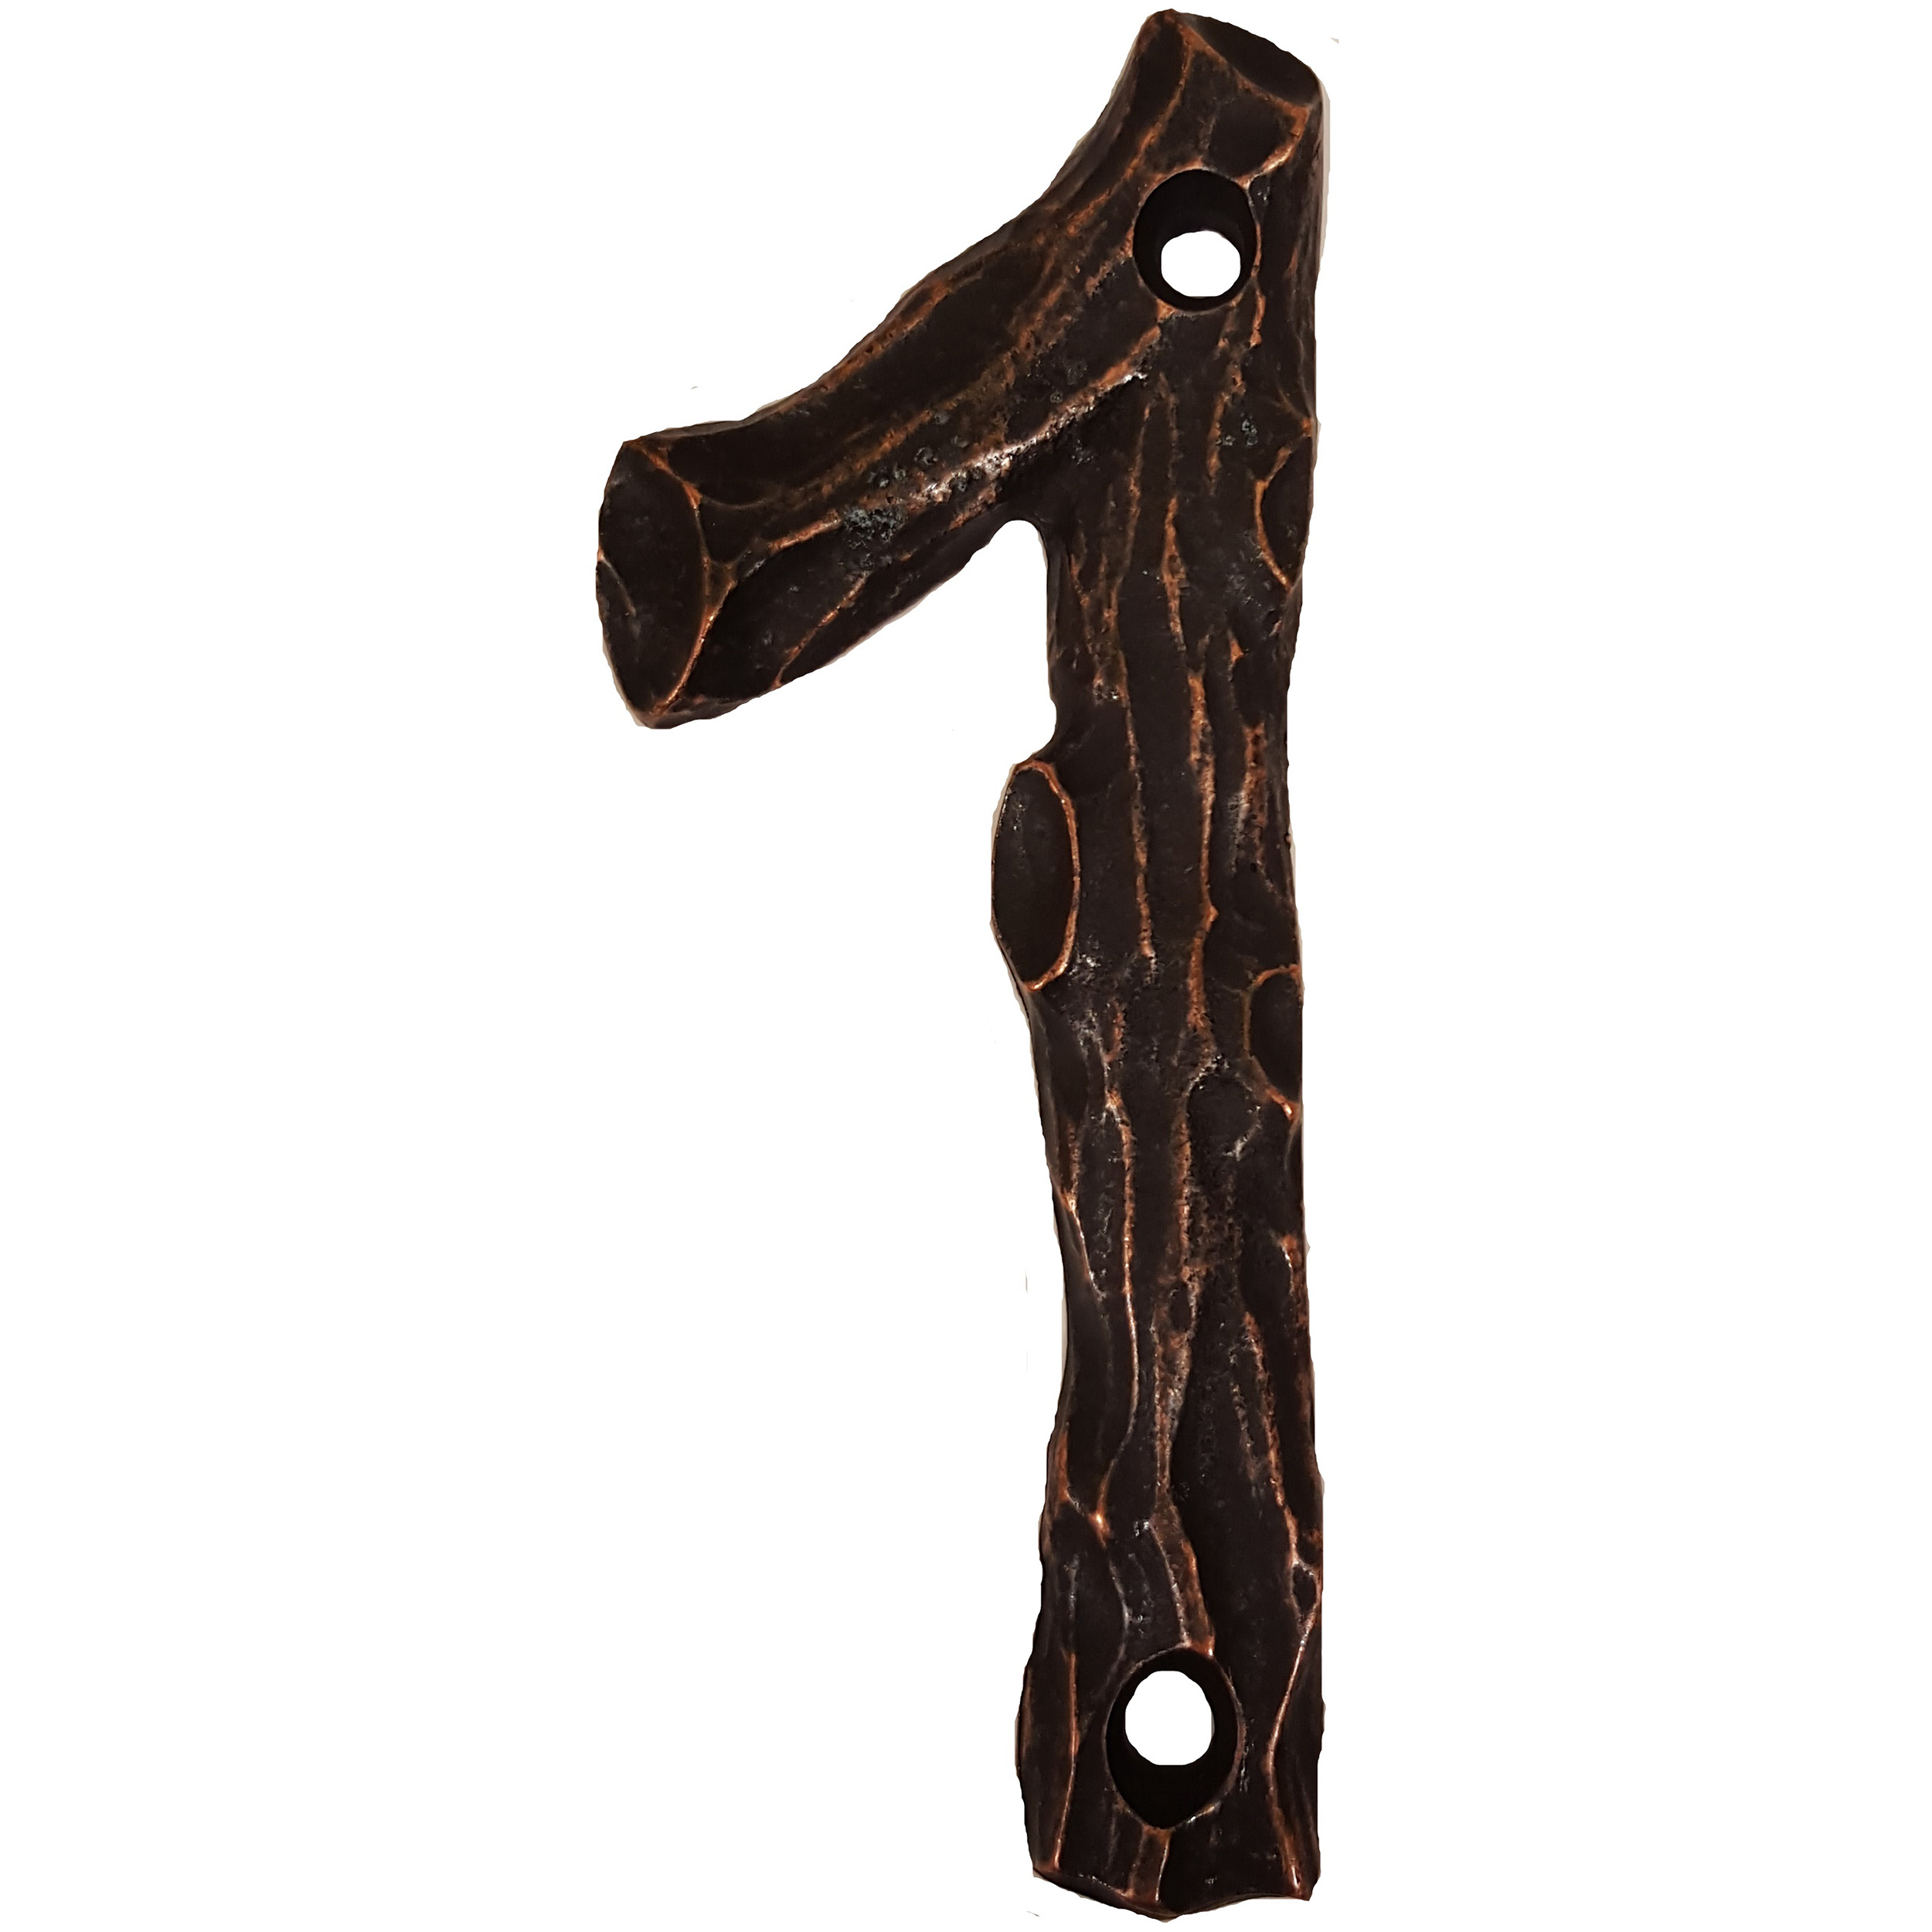 Lhn1-orb Log House Number 1, Oil Rubbed Bronze, 1 Piece